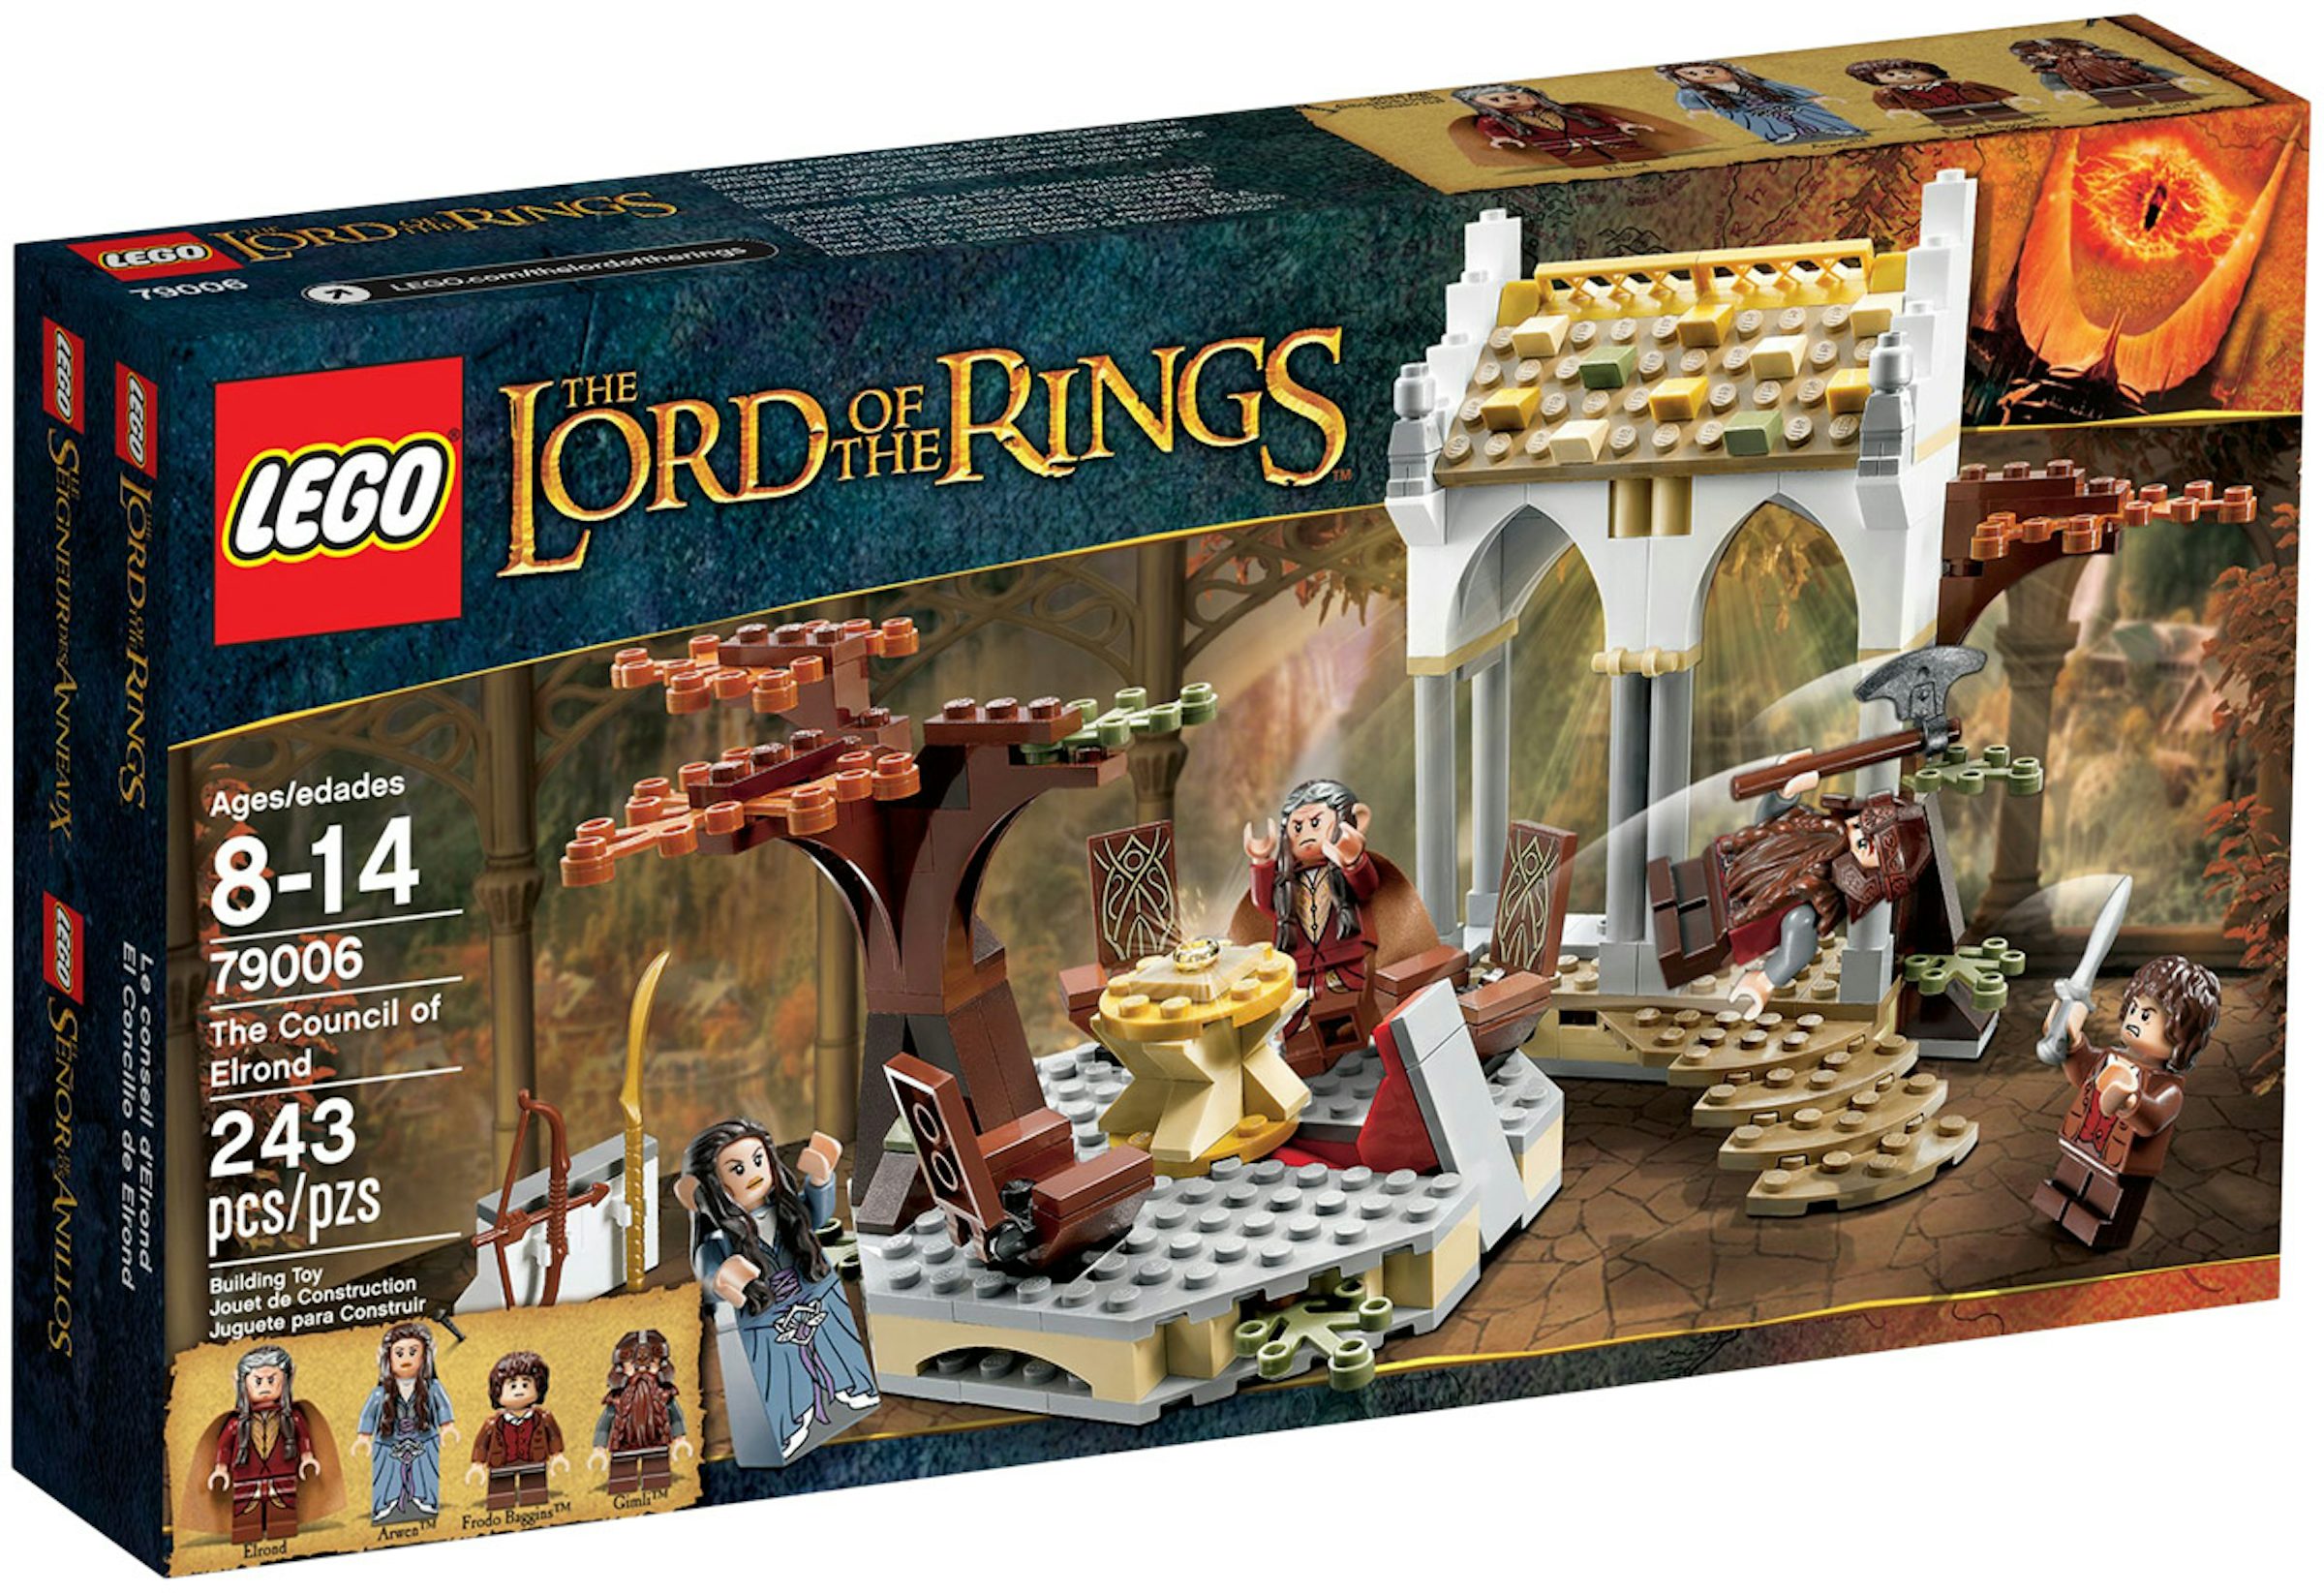 LEGO The Lord of the Rings The Council of Elrond Set 79006 - US